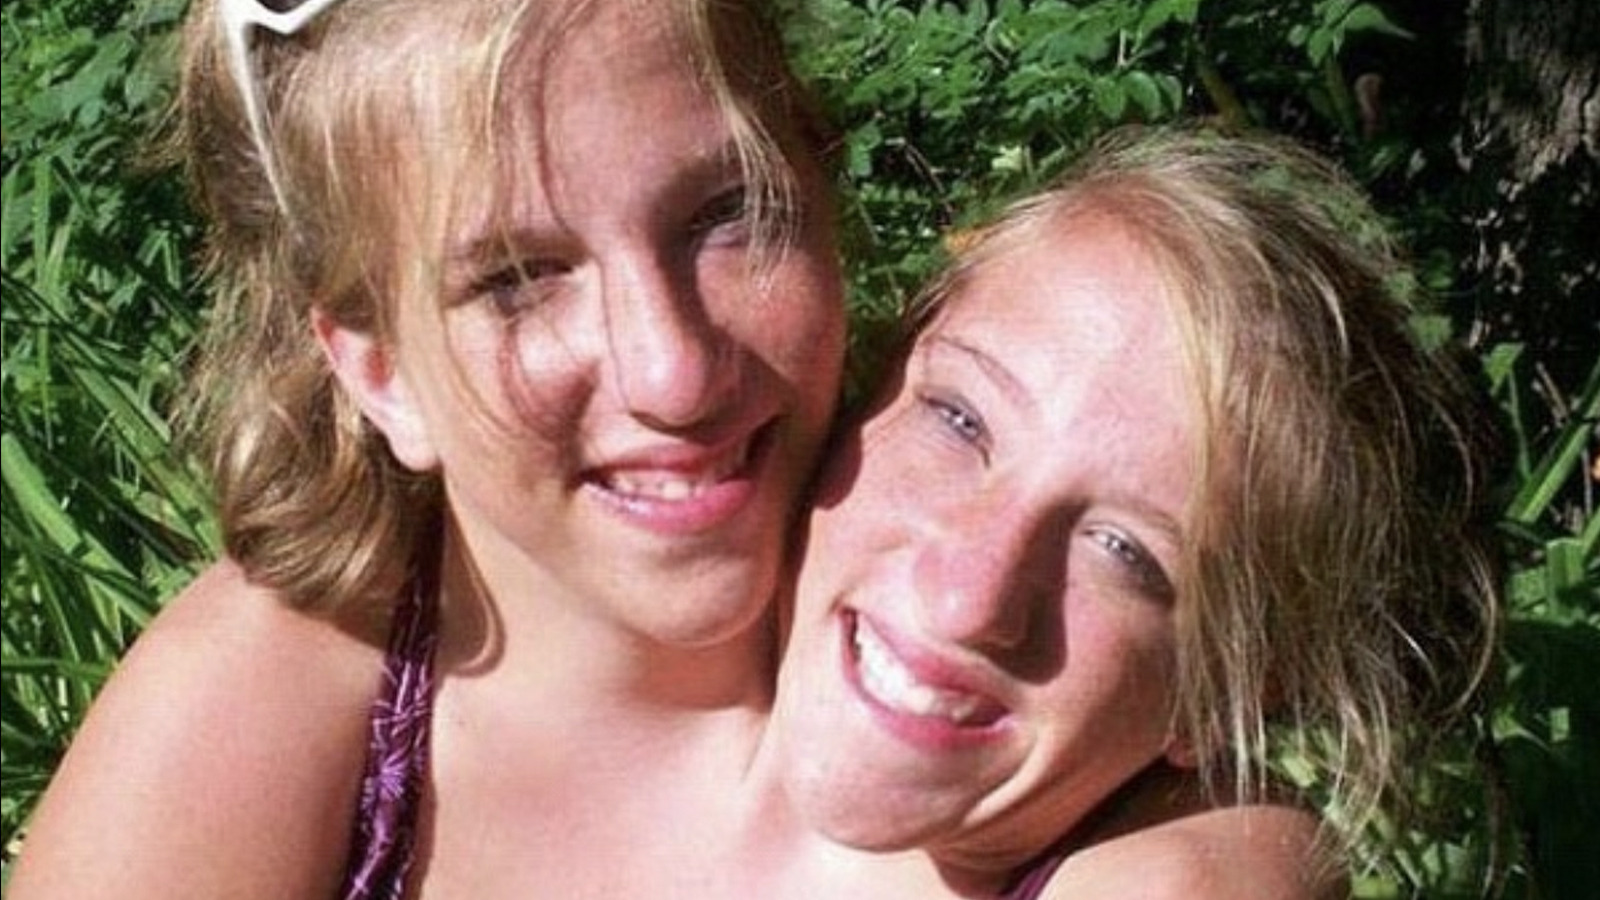 Abigail & Brittany Hensel - The Twins Who Share a Body - Mirror Online